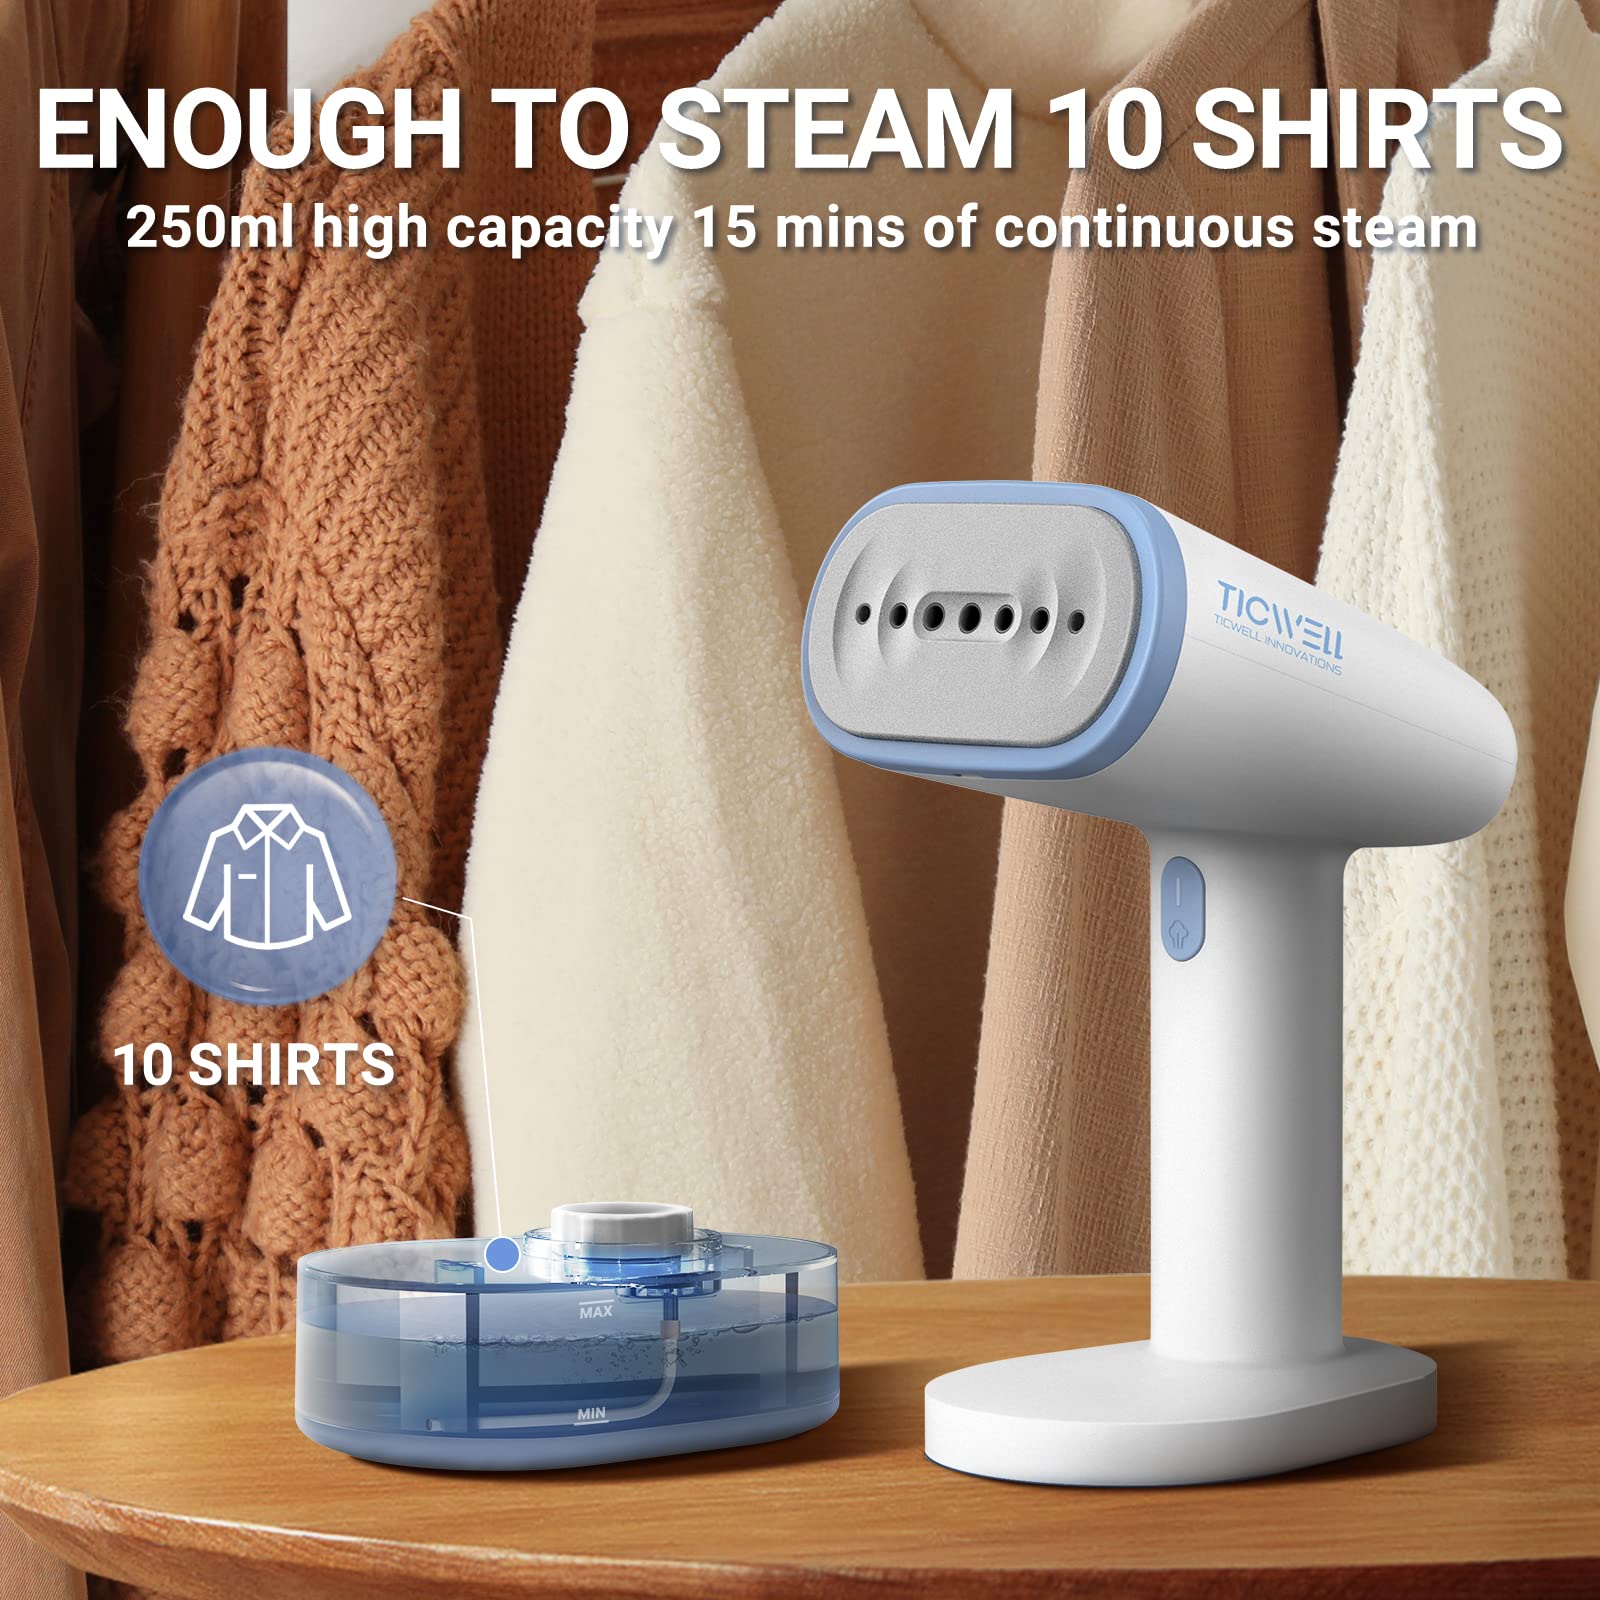 TICWELL Steamer for Clothes Steamer, Fashion Handheld Clothing Steamer for Garments, 1500W Powerful Portable Travel Steamer,50ML High Capacity 15Mins Continuous Steam, 25s Fast Heat-up, Light Steam Iron for travel and home